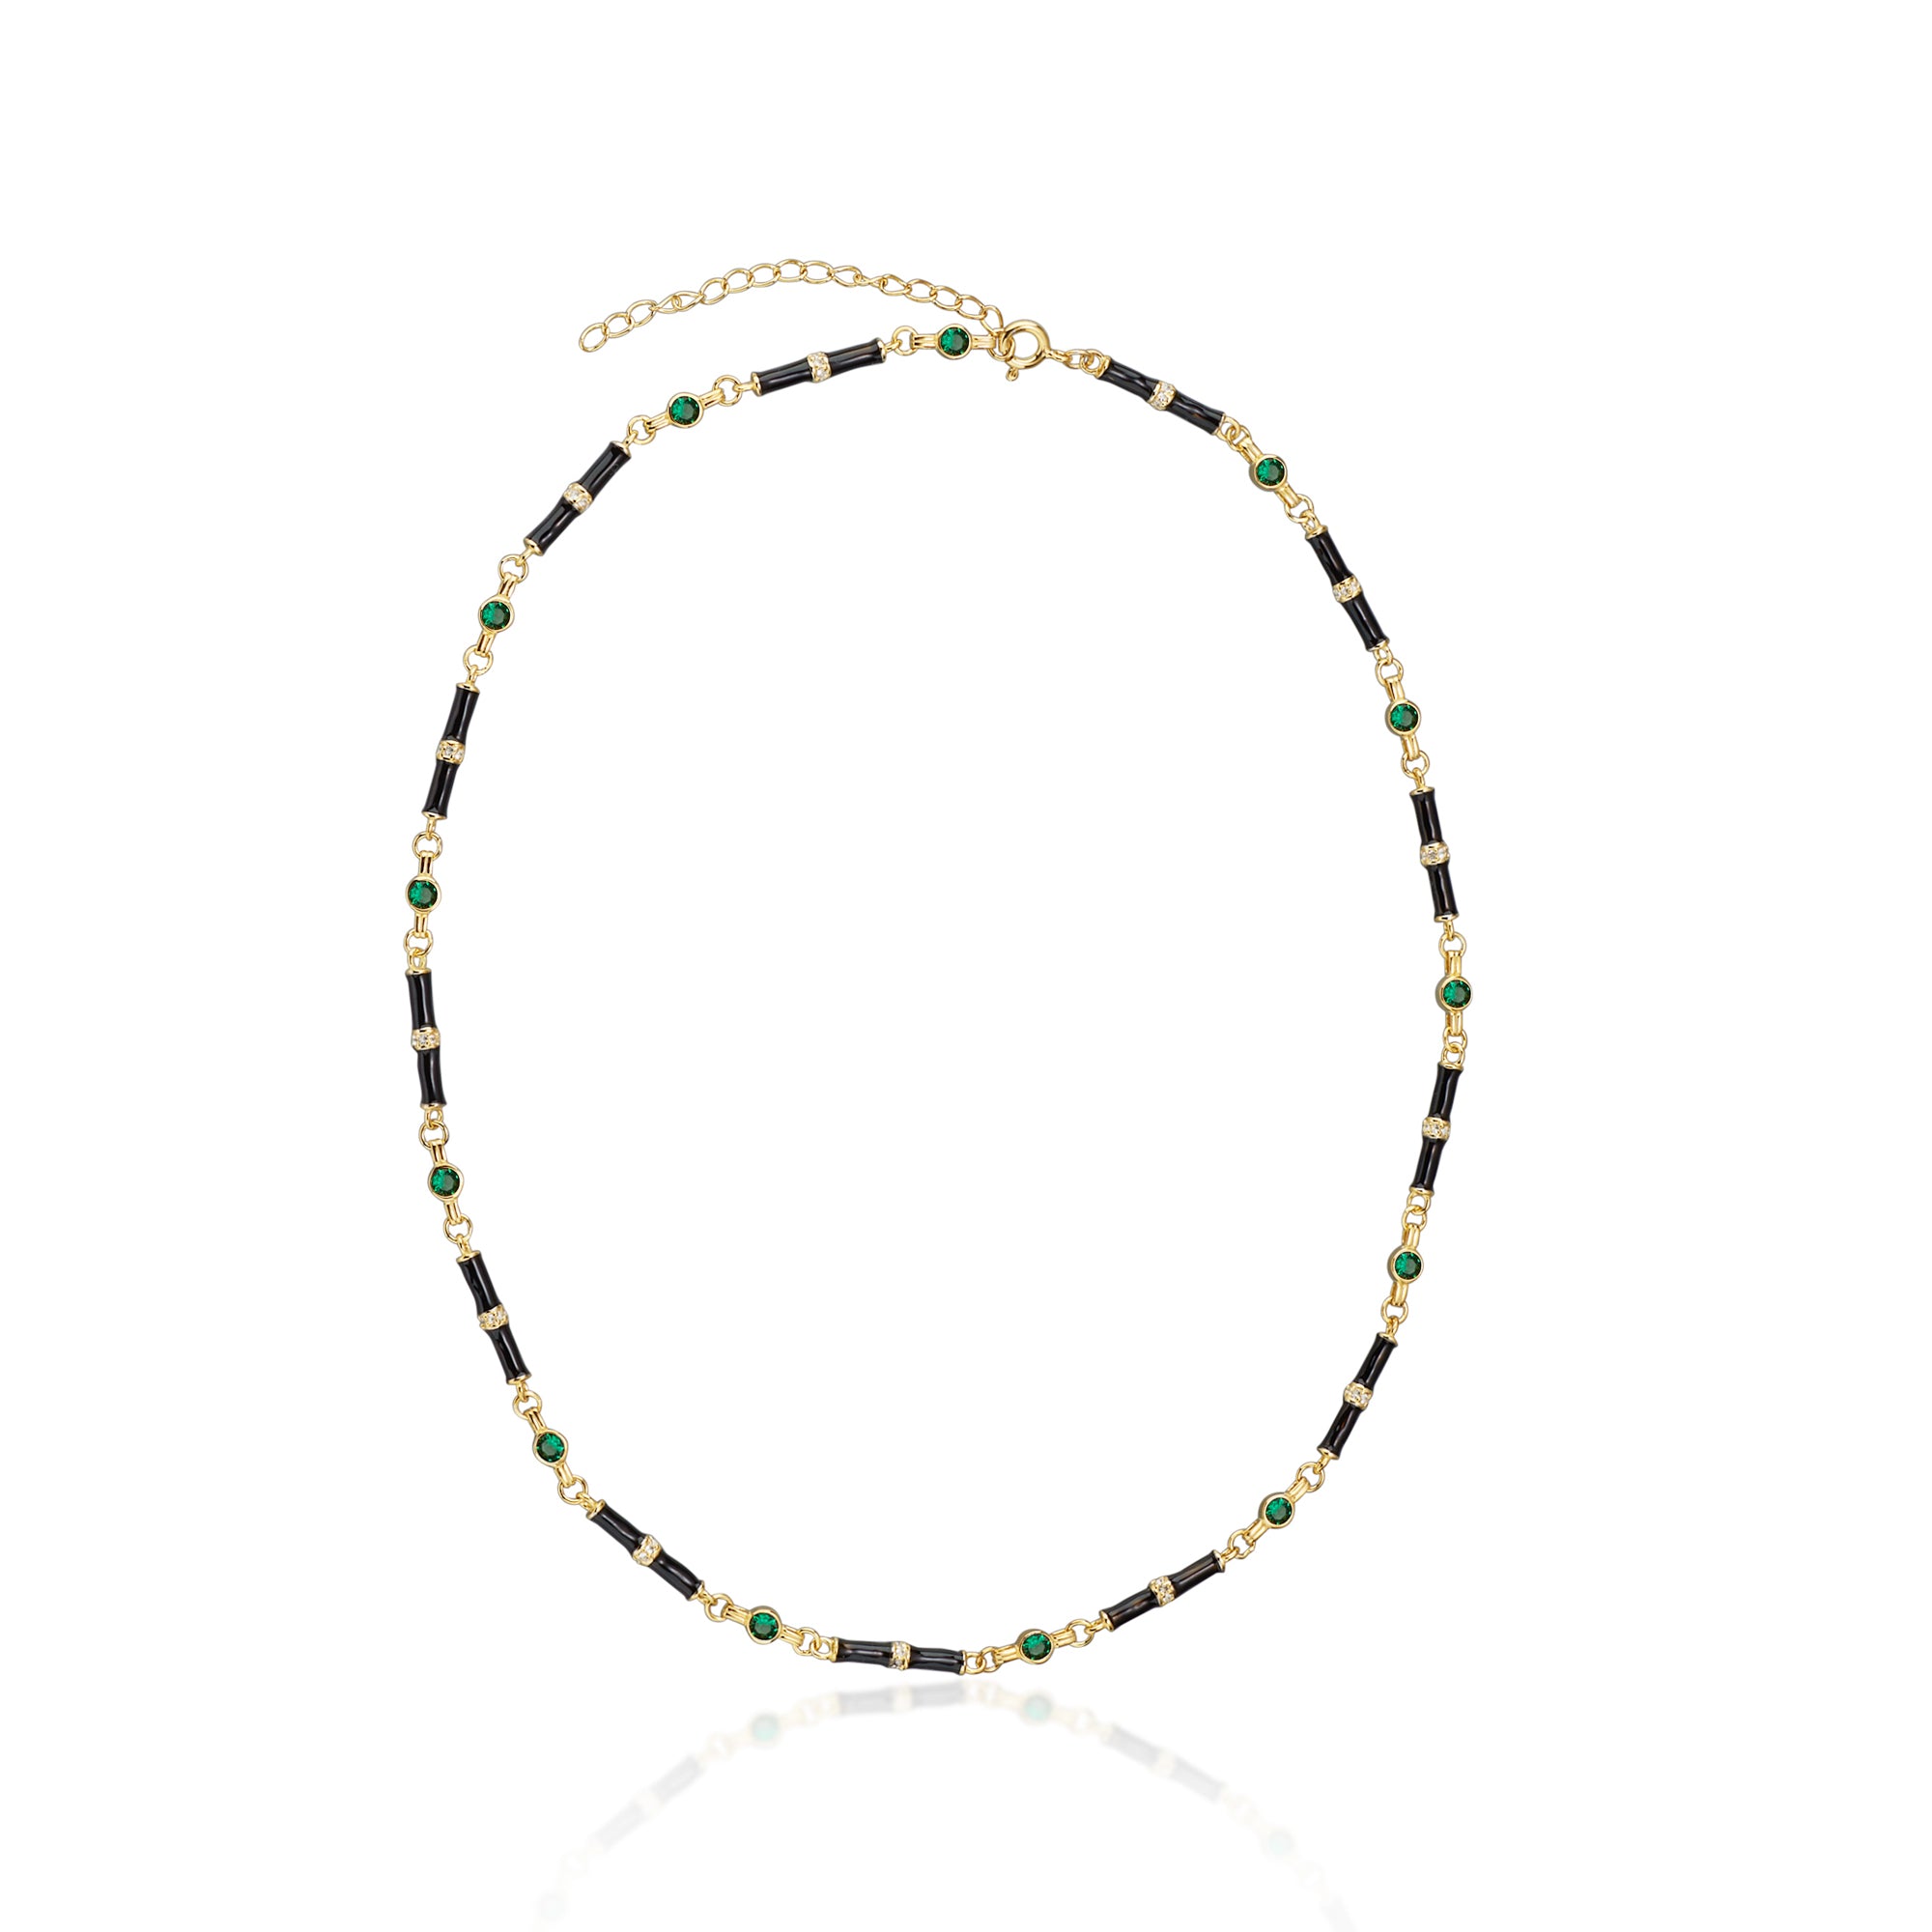 PRE-ORDER: Marlowe Black Enamel Necklace with Emerald Green Stone